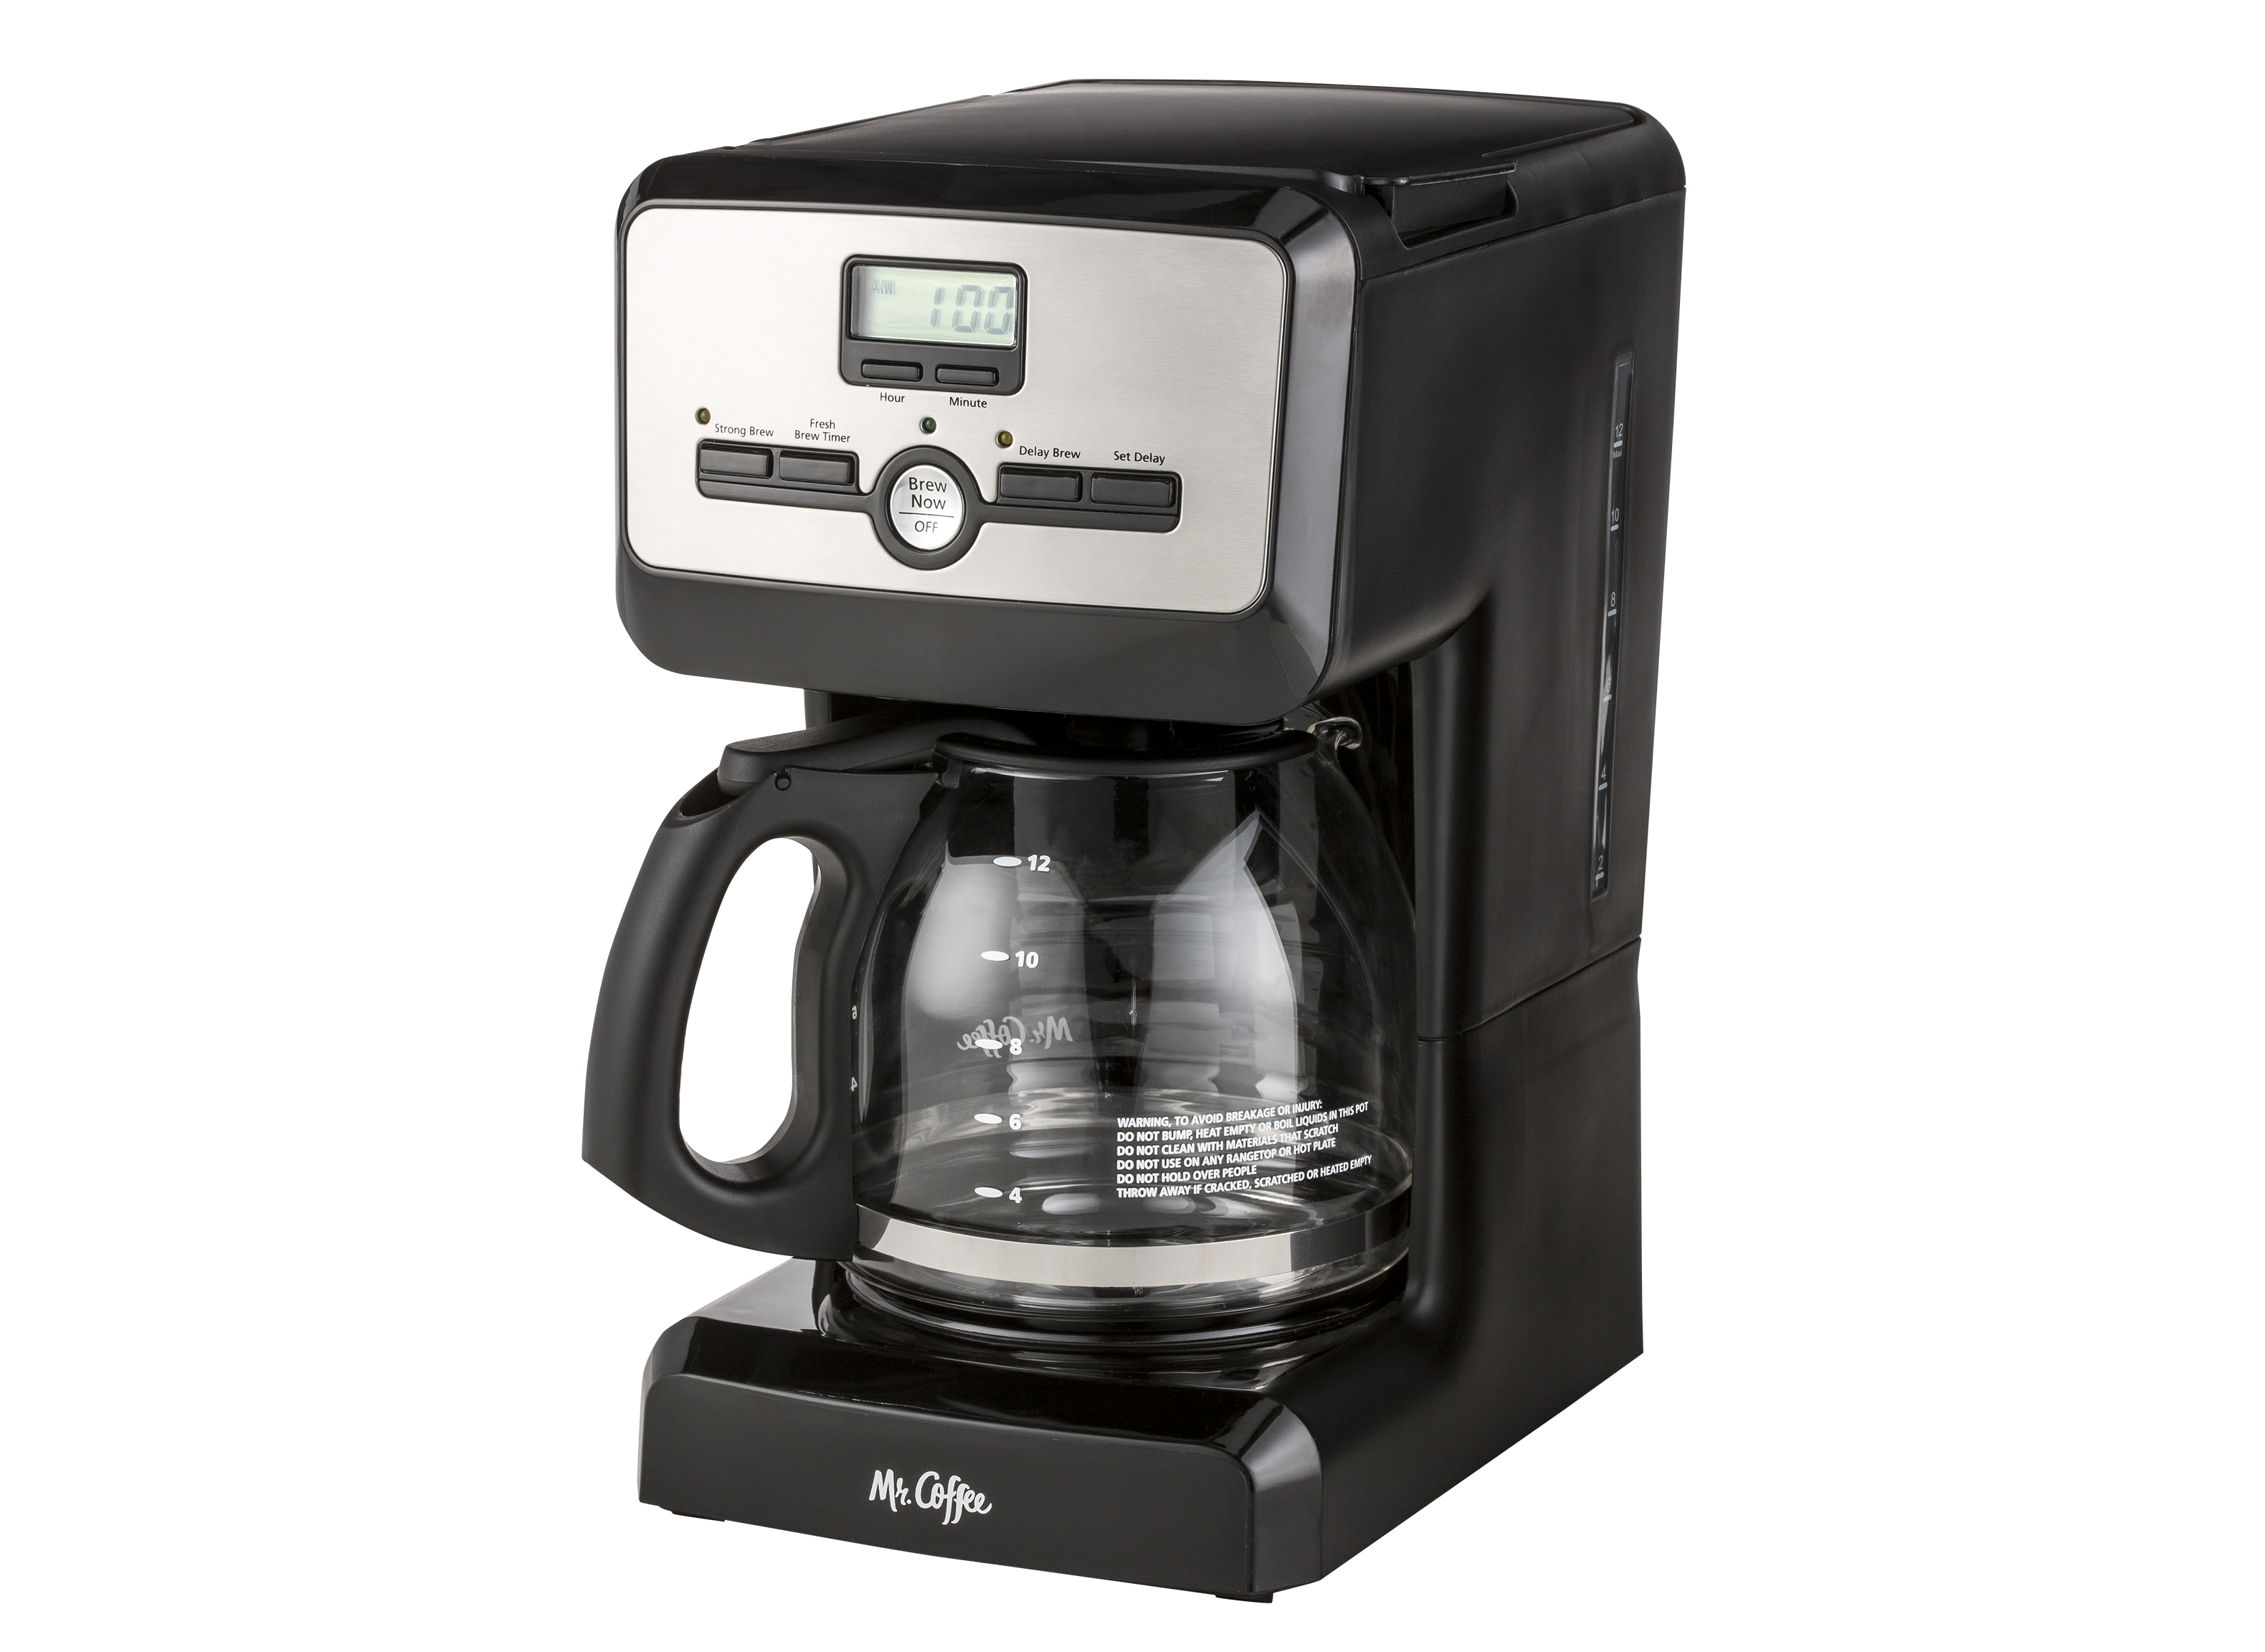 https://crdms.images.consumerreports.org/prod/products/cr/models/386198-coffeemakers-mrcoffee-bvmcpjx23targetexclusive.png